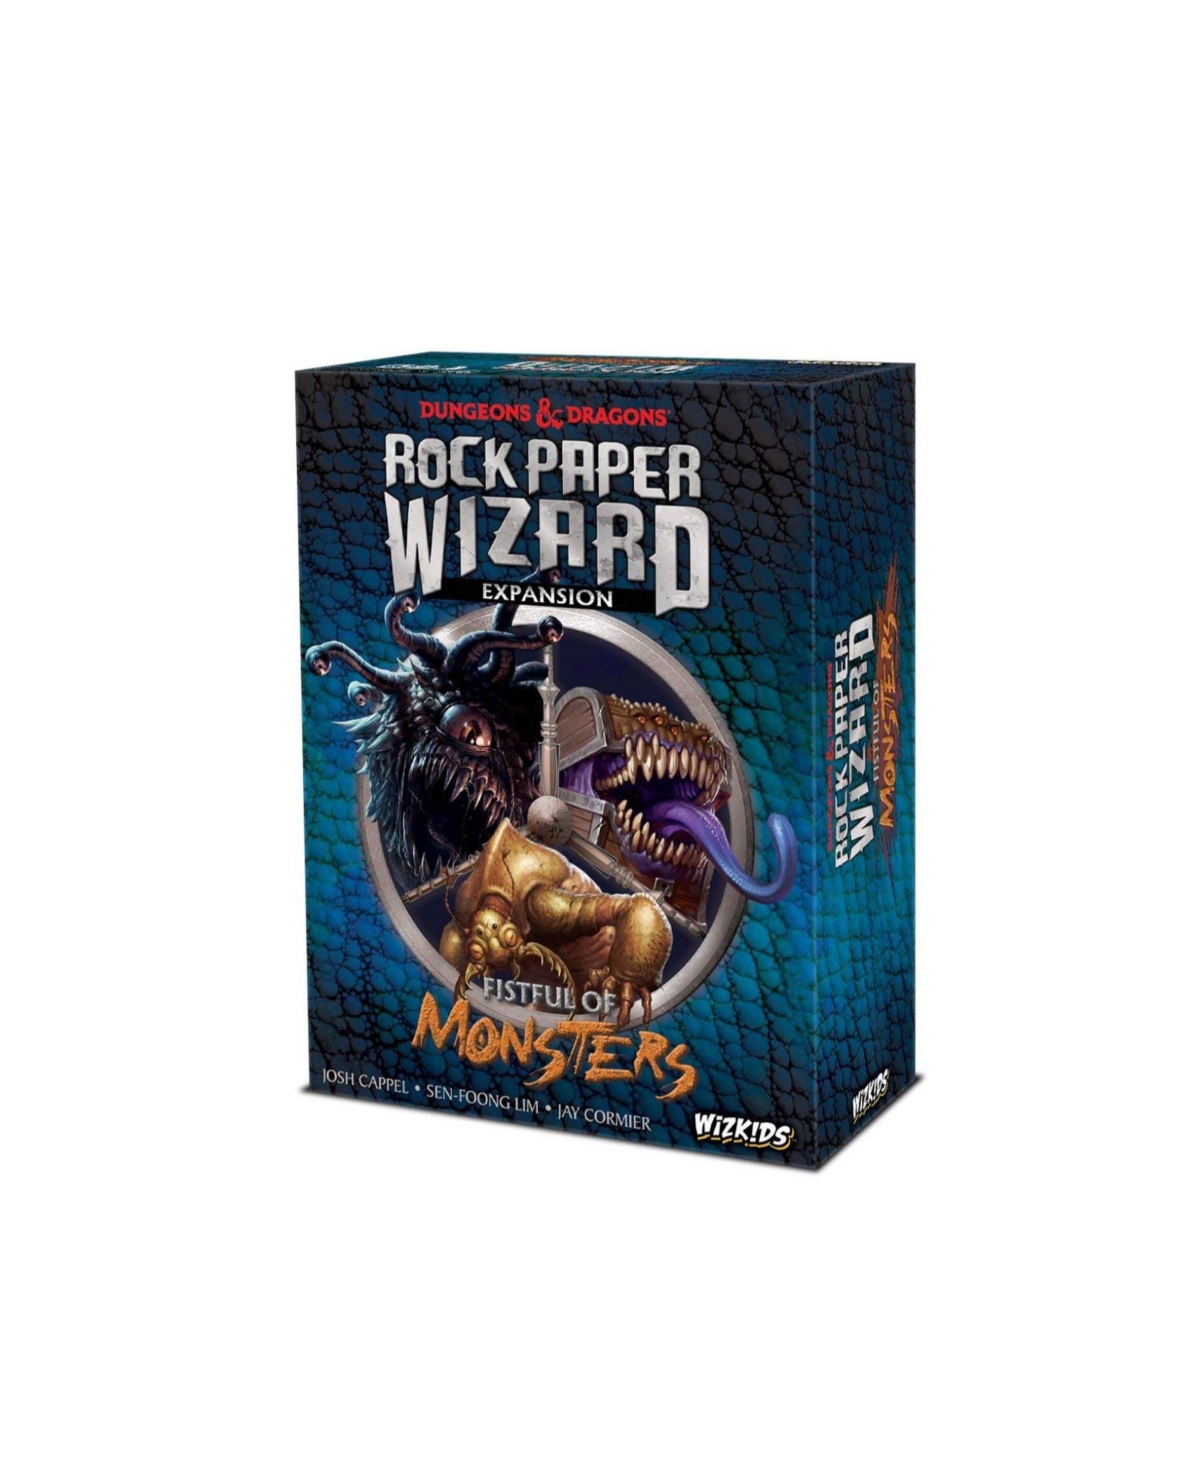 Wizkids Games Wiz Kids Rock Paper Wizard Fistful Of Monsters Expansion Game In Multi